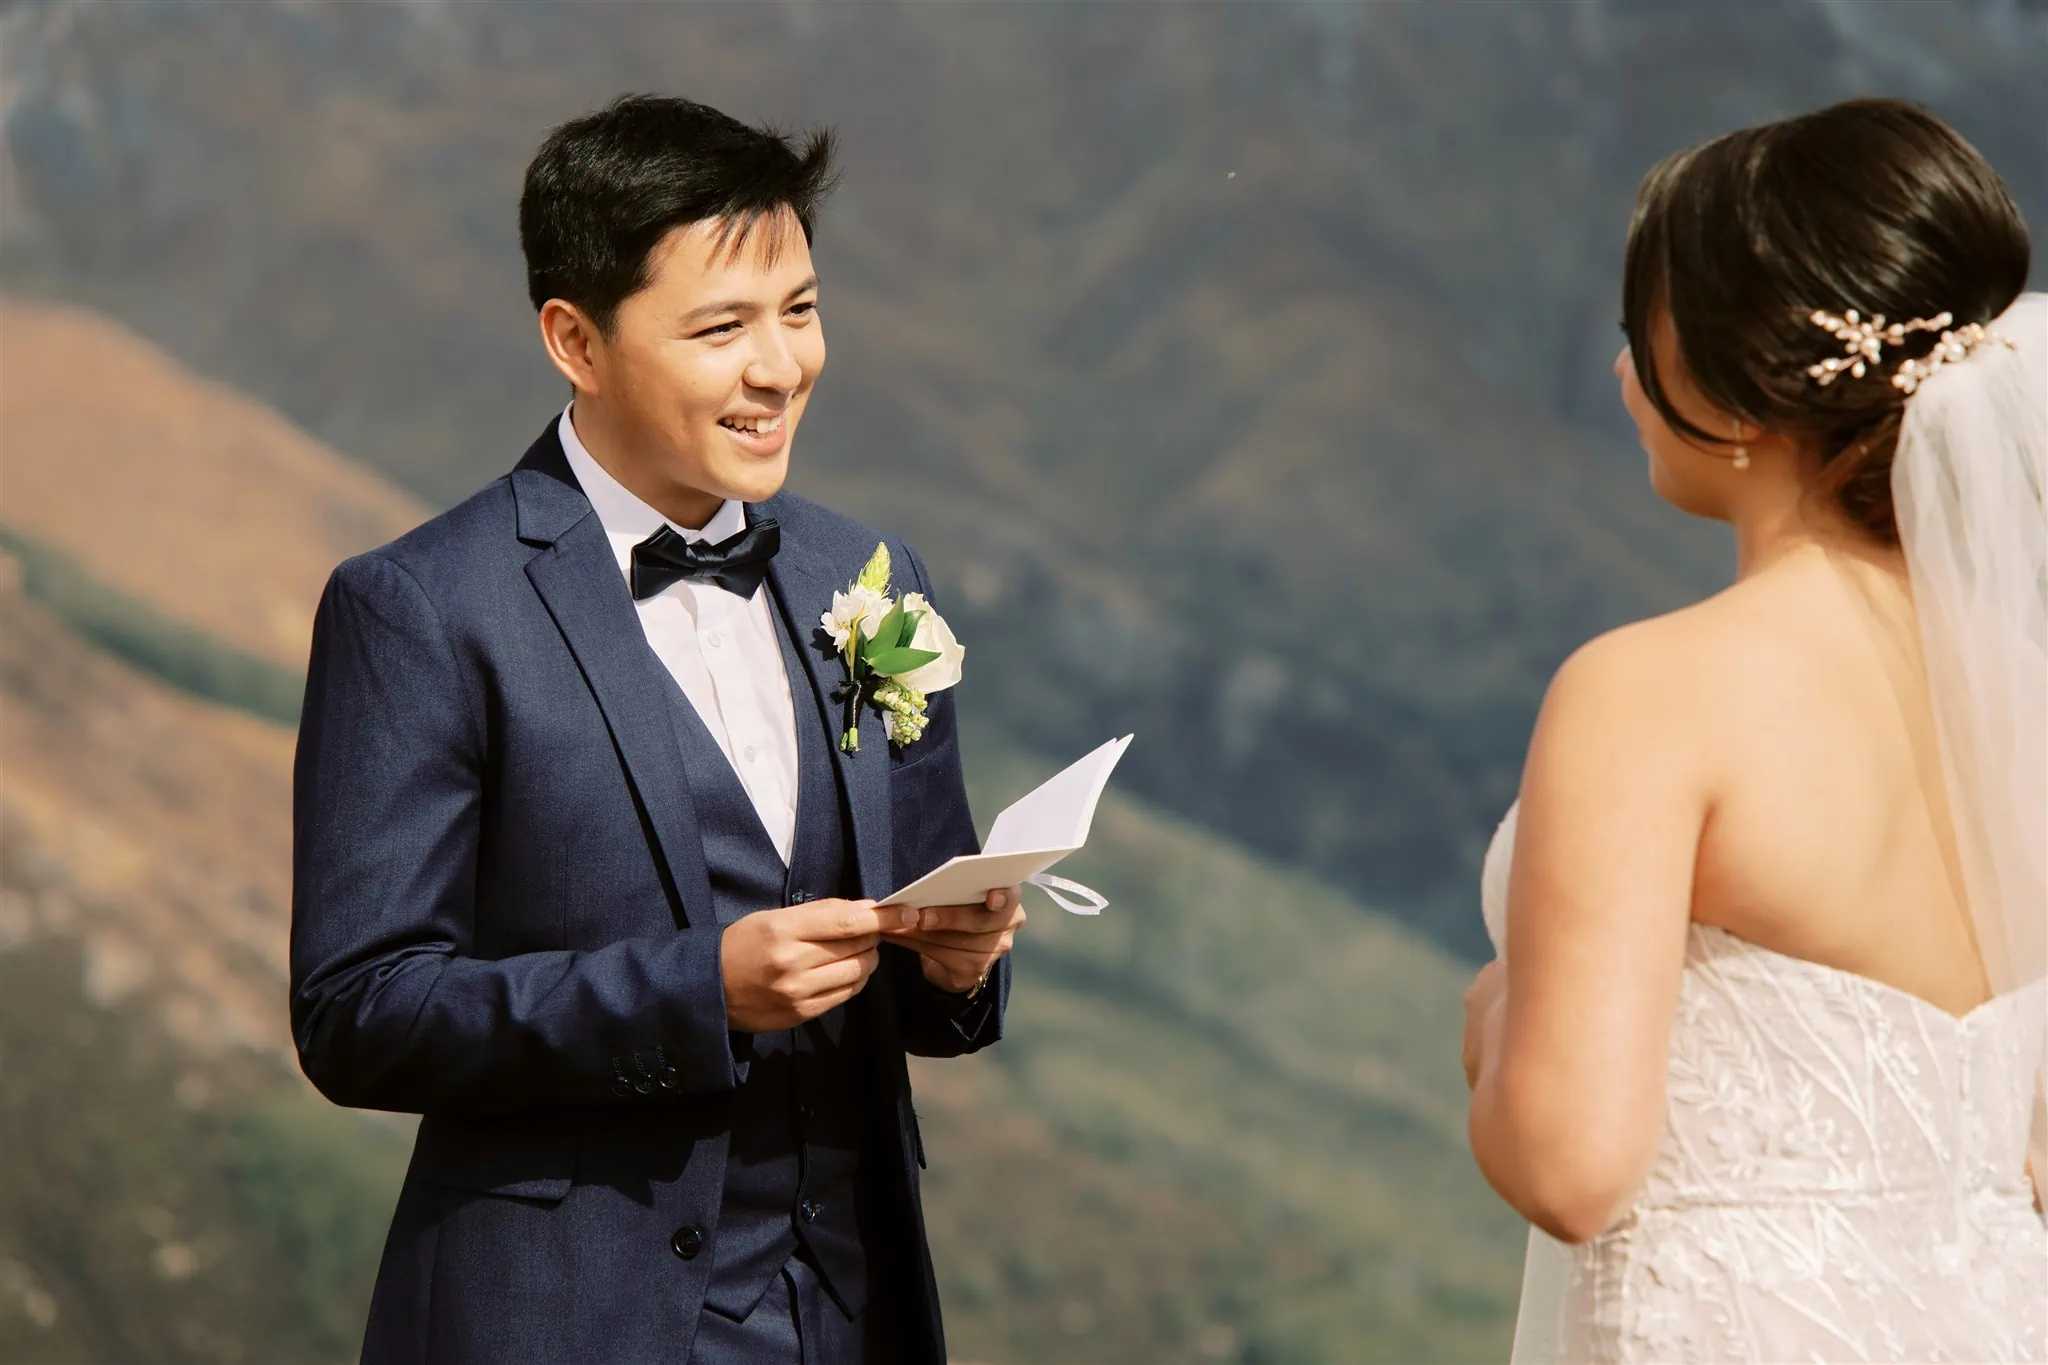 Queenstown Elopement Heli Wedding Photographer クイーンズタウン結婚式 | A Queenstown elopement takes the bride and groom on an epic journey, exchanging heartfelt vows as they stand in front of a majestic mountain. Perched on a cliff, their love for